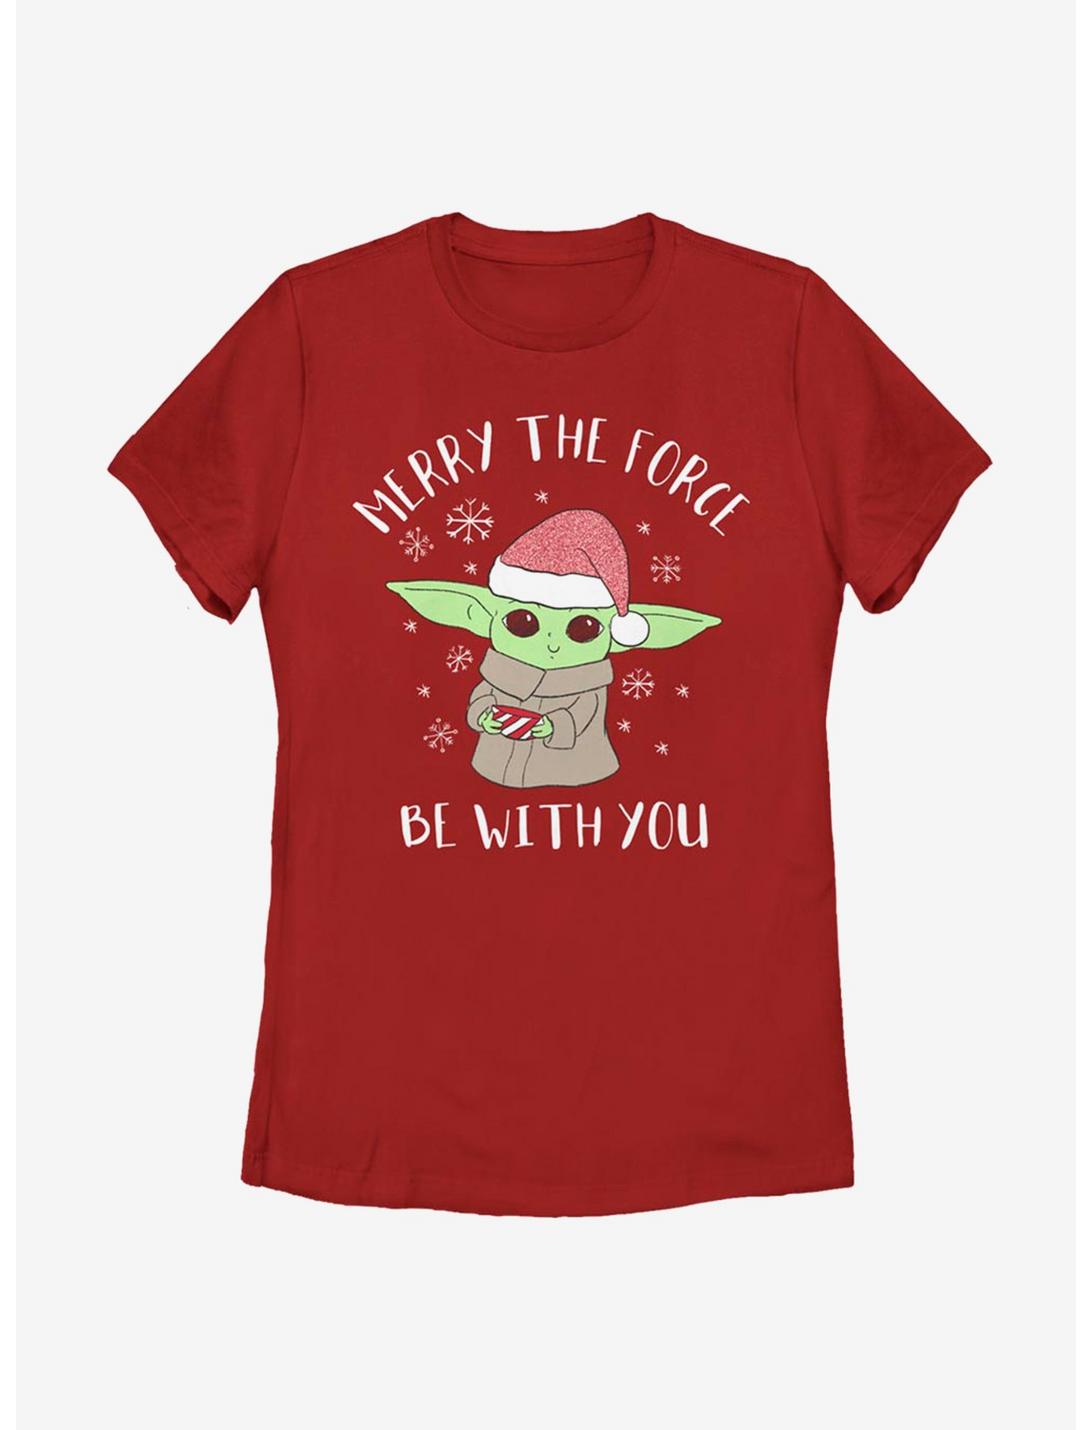 Star Wars The Mandalorian Christmas The Child Womens T-Shirt, RED, hi-res